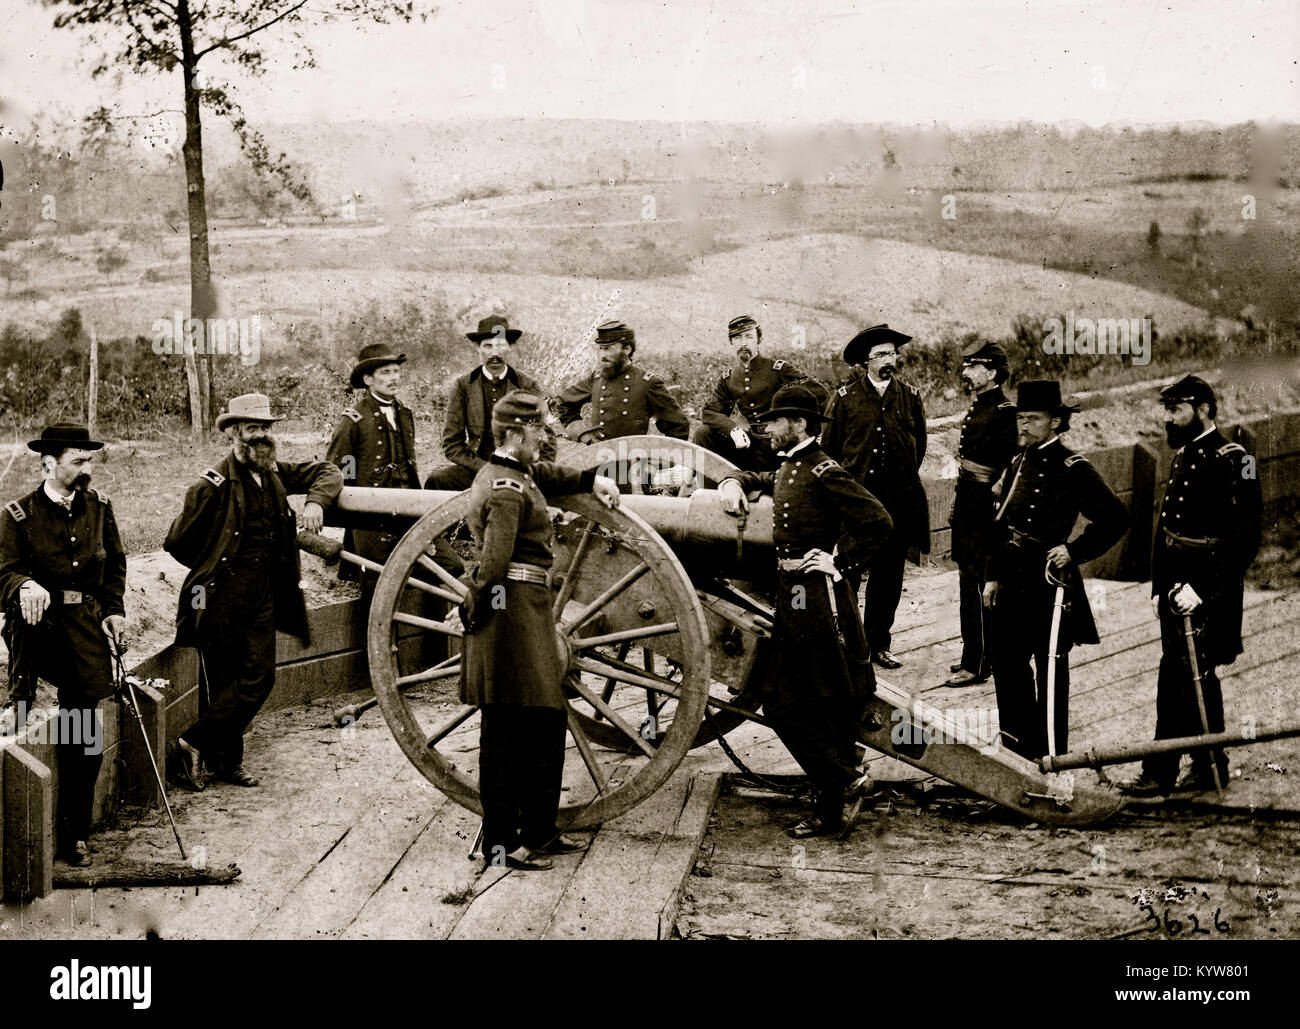 Atlanta, Ga. Gen. William T. Sherman, leaning on breach of gun, and staff at Federal Fort No. 7 Stock Photo